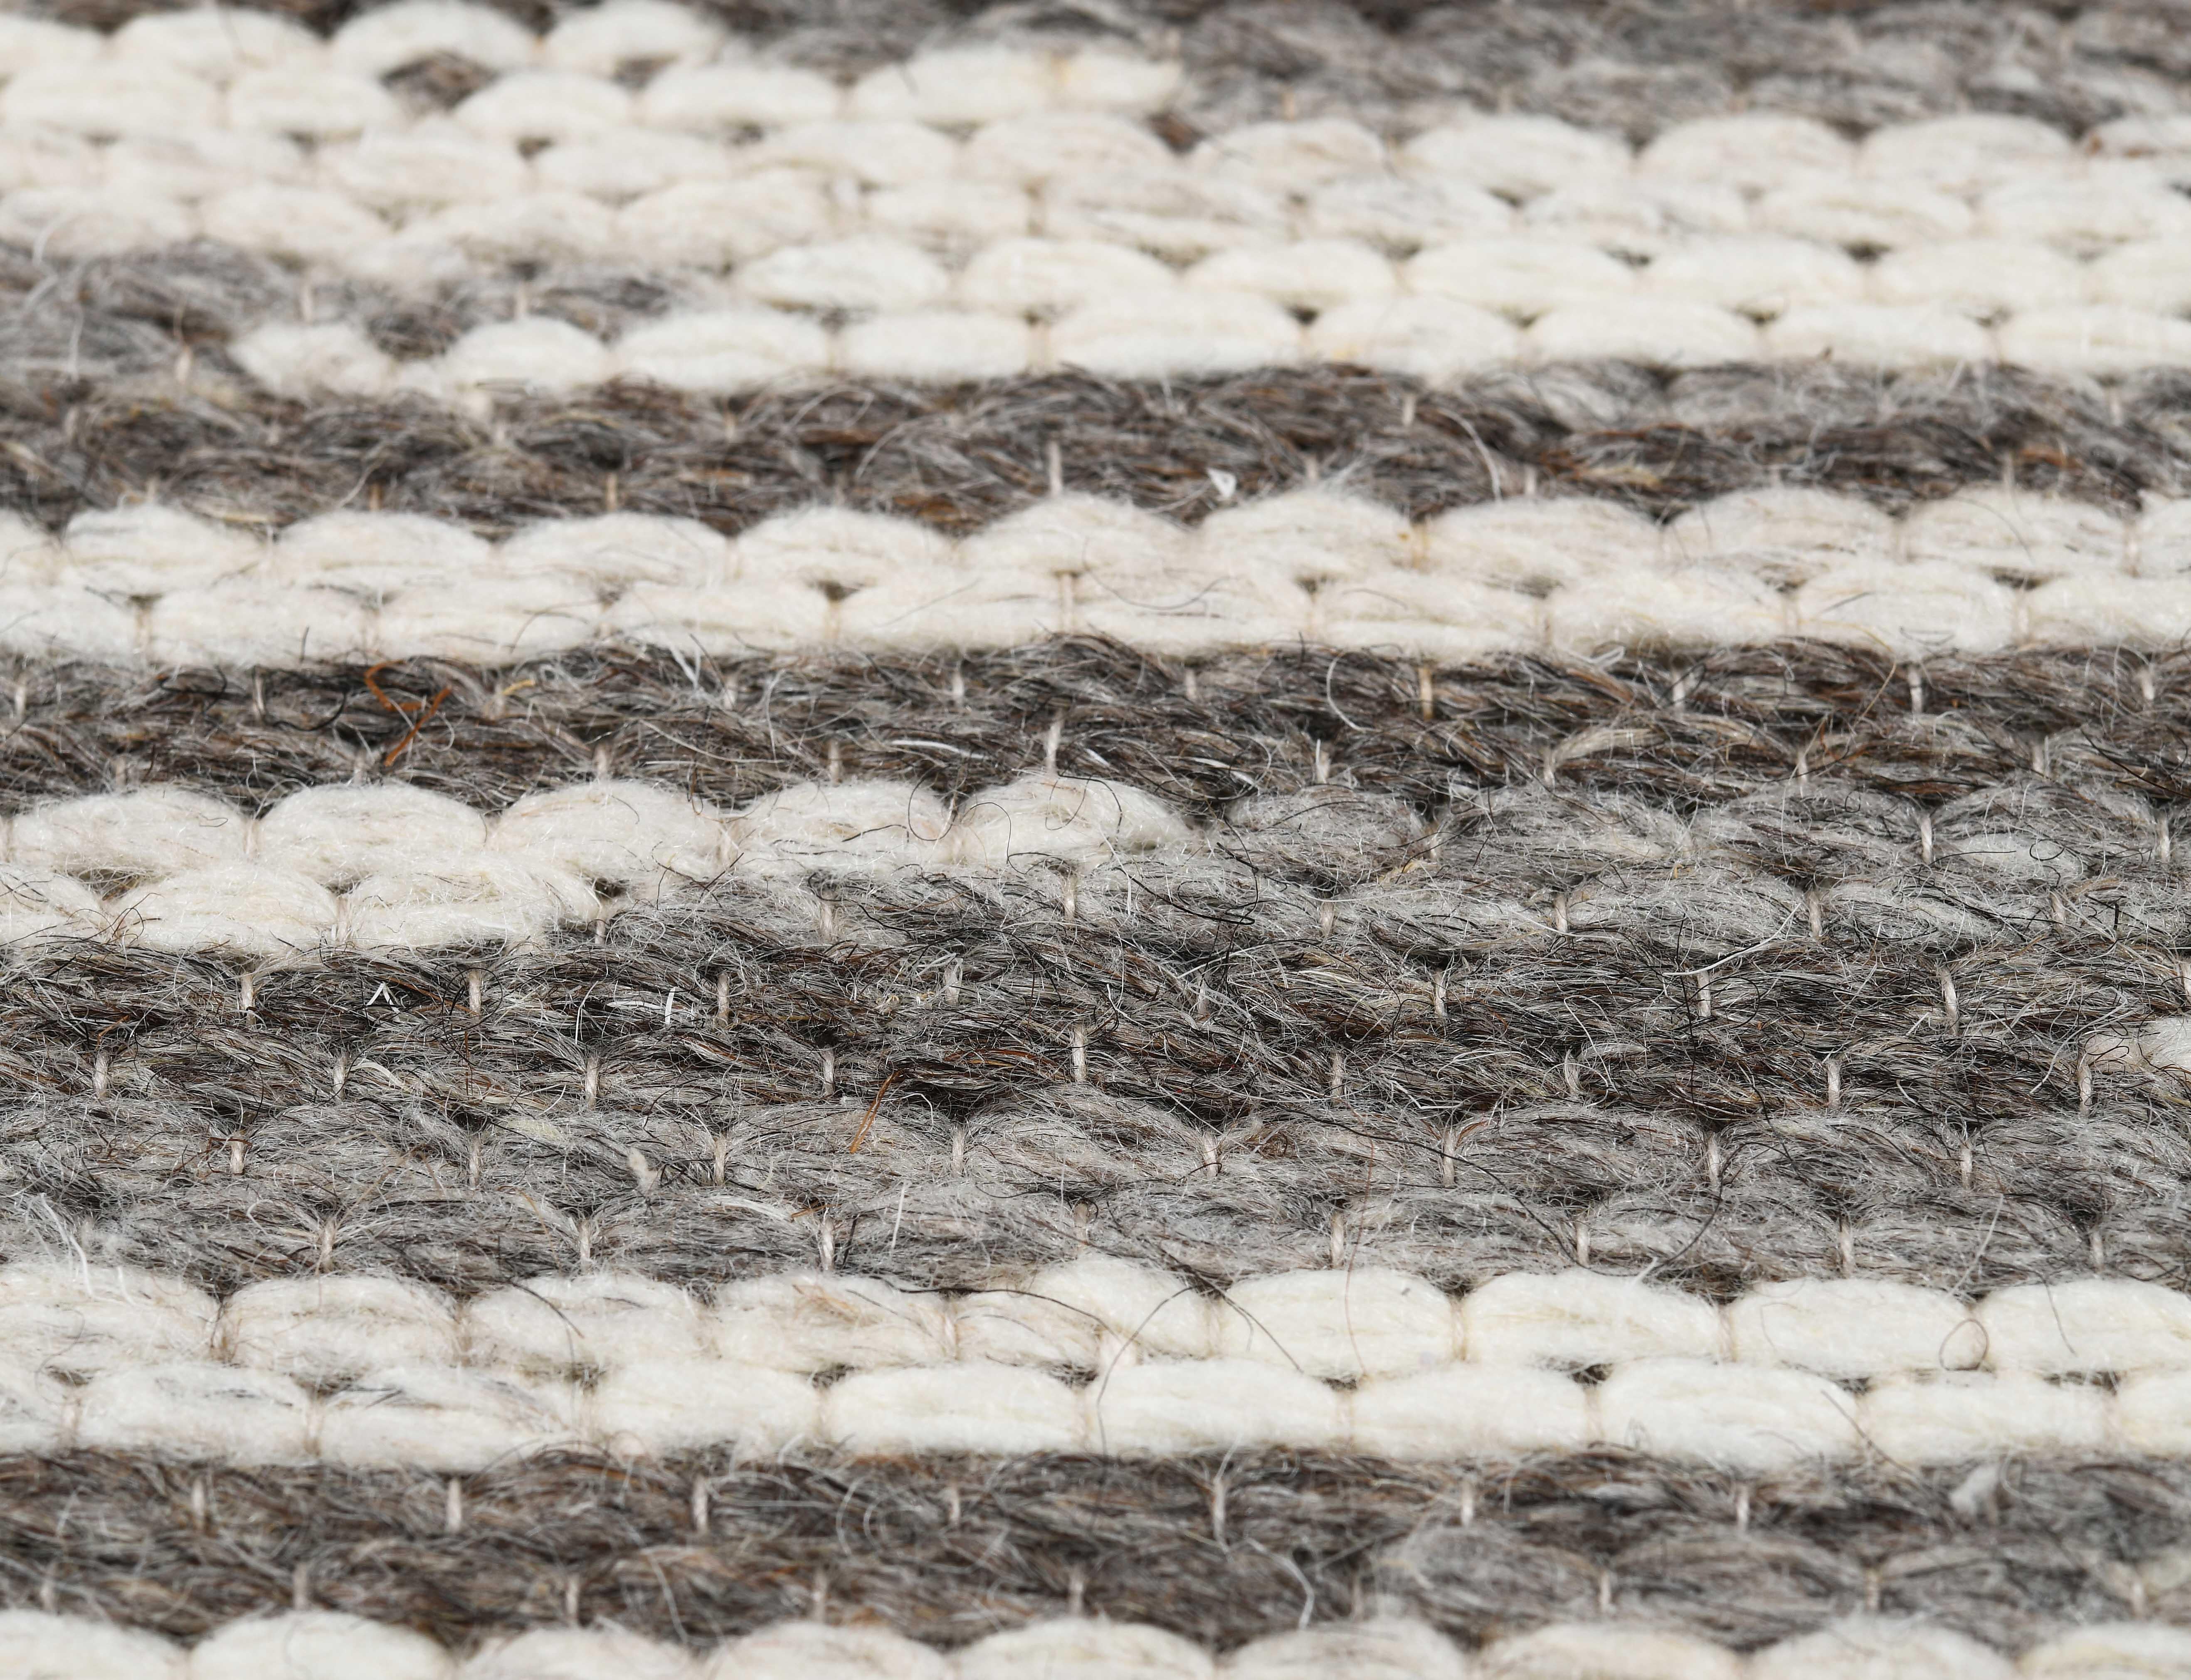 Indian Rivus, Grey, Handwoven Face 60% Undyed NZ Wool, 40% Undyed MED Wool, 6' x 9' For Sale